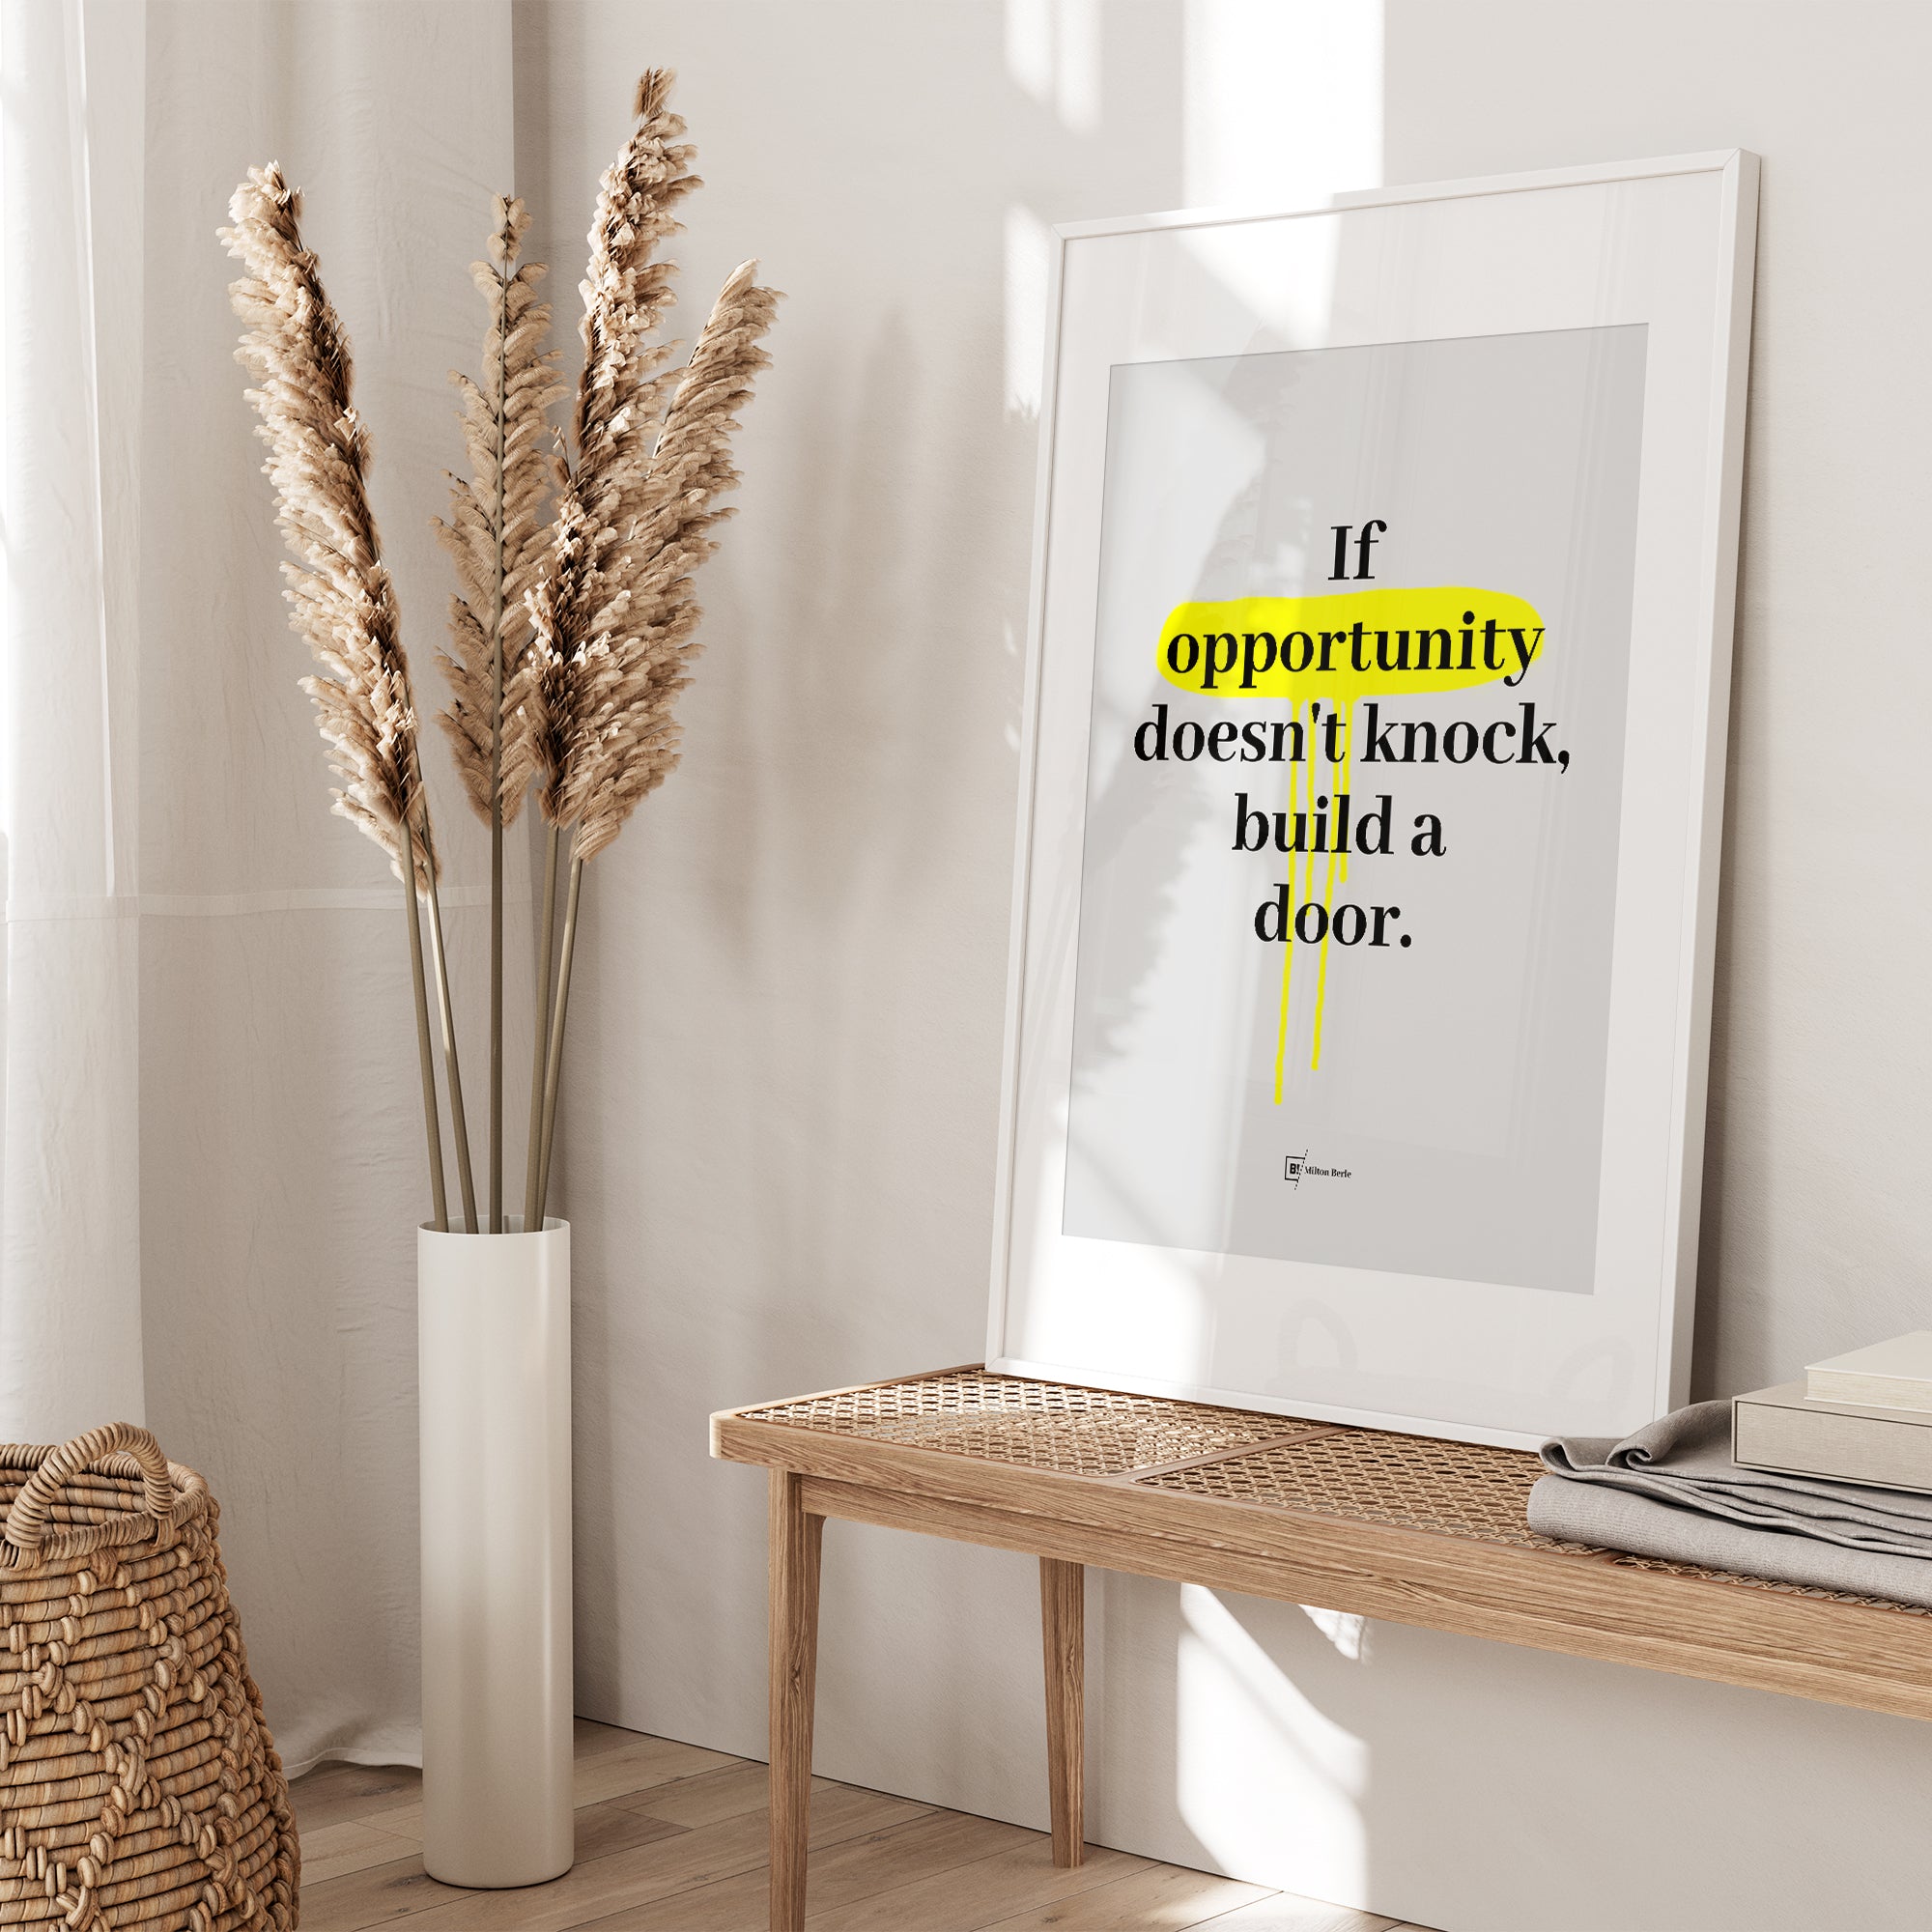 Be inspired by Milton Berle's famous "If opportunity doesn't knock, build a door" quote art print. This artwork was printed using the giclée process on archival acid-free paper and is presented in a white frame with passe-partout that captures its timeless beauty in every detail.